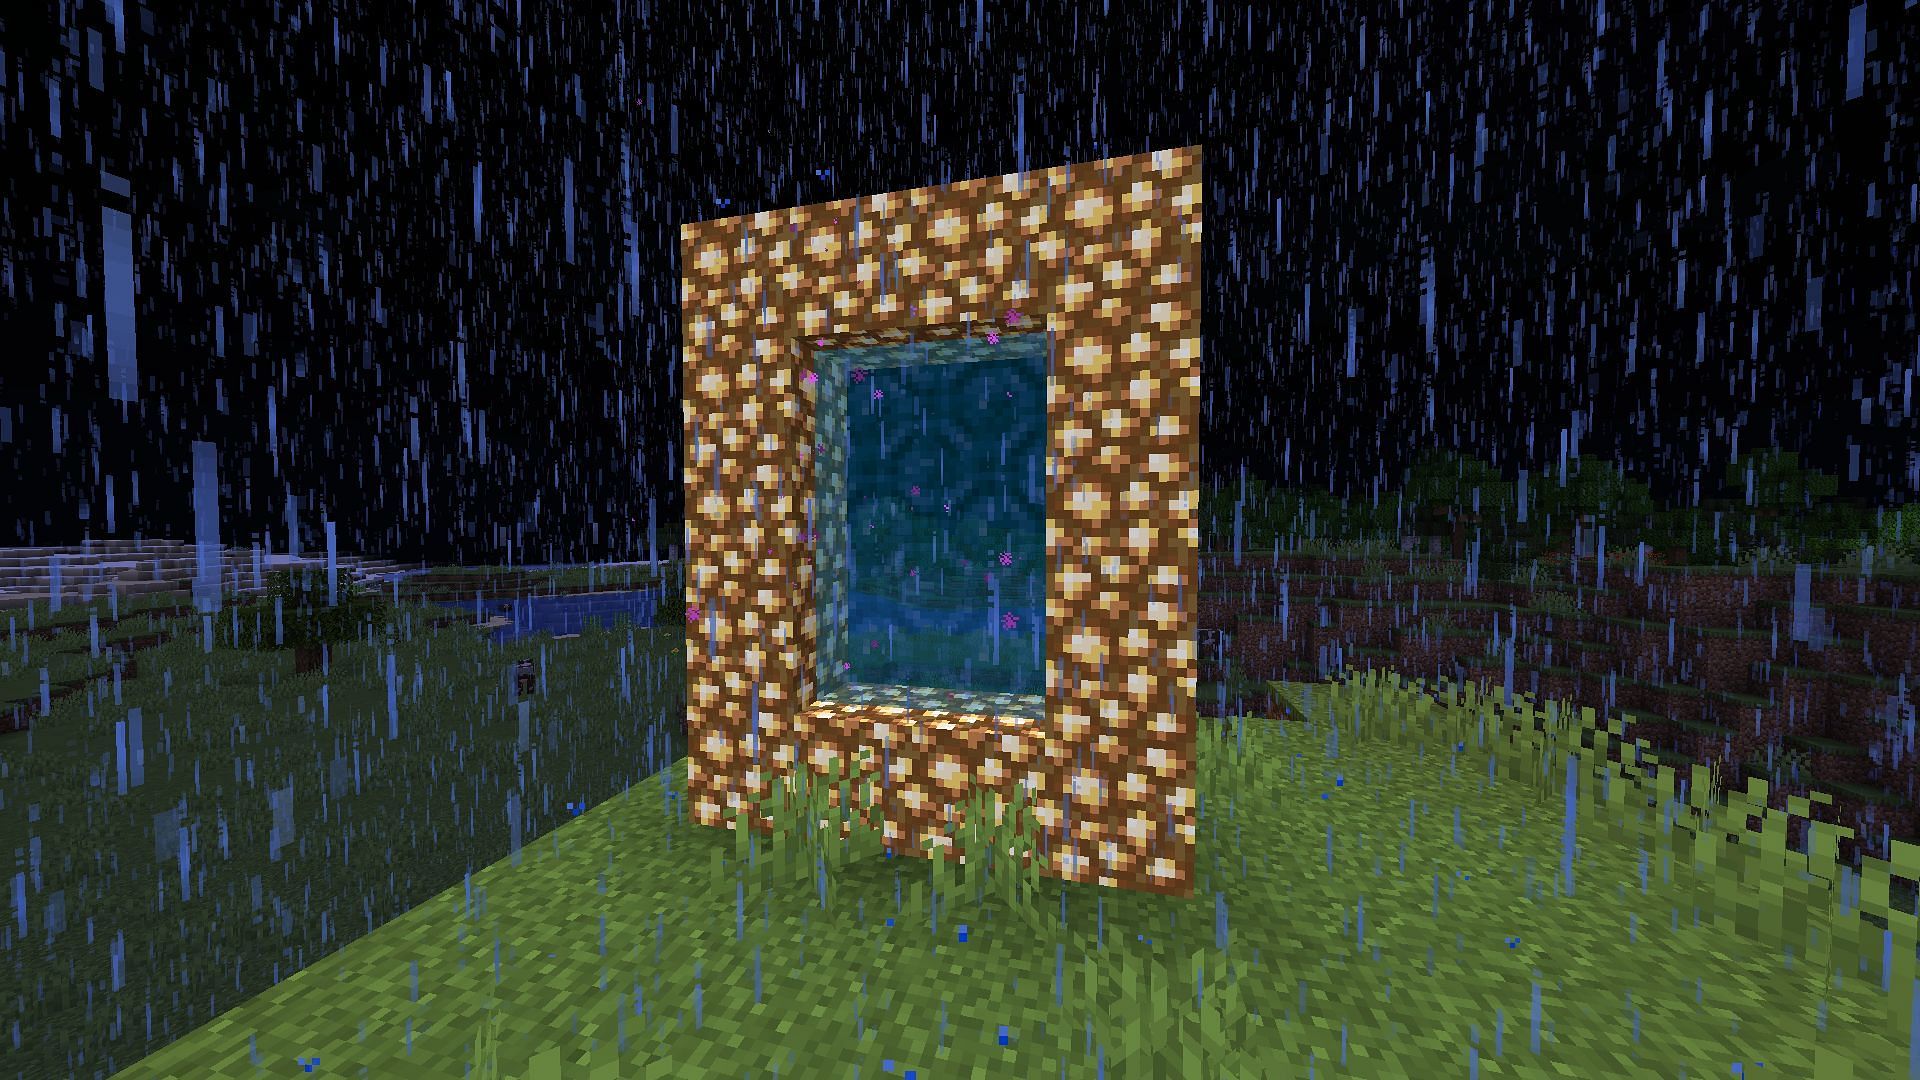 Aether portal mod is one of the most famous pranks in Minecraft history (Image via Mojang)